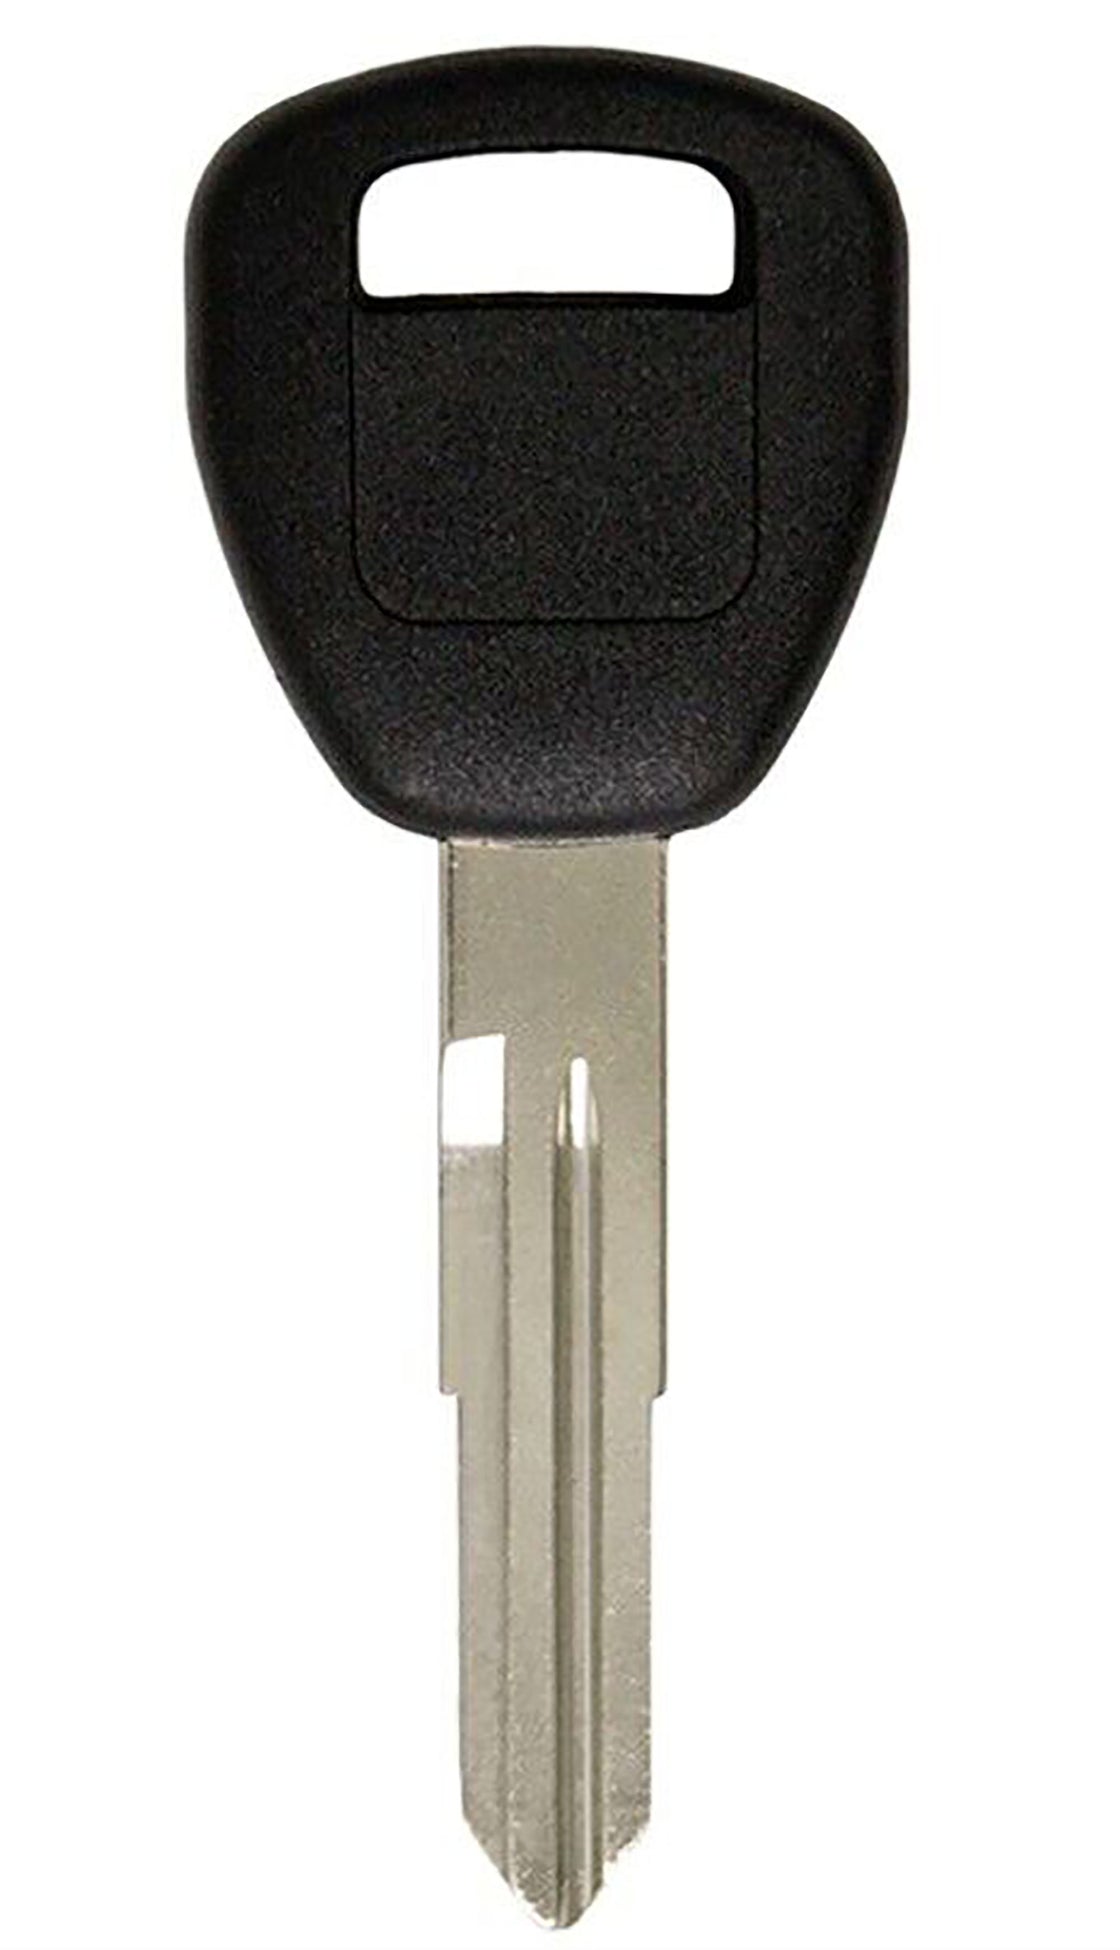 1x New Replacement Transponder Key Compatible with & Fit For Acura Vehicles PHILIPS 46 "V" chip - MPN HD111PT-03